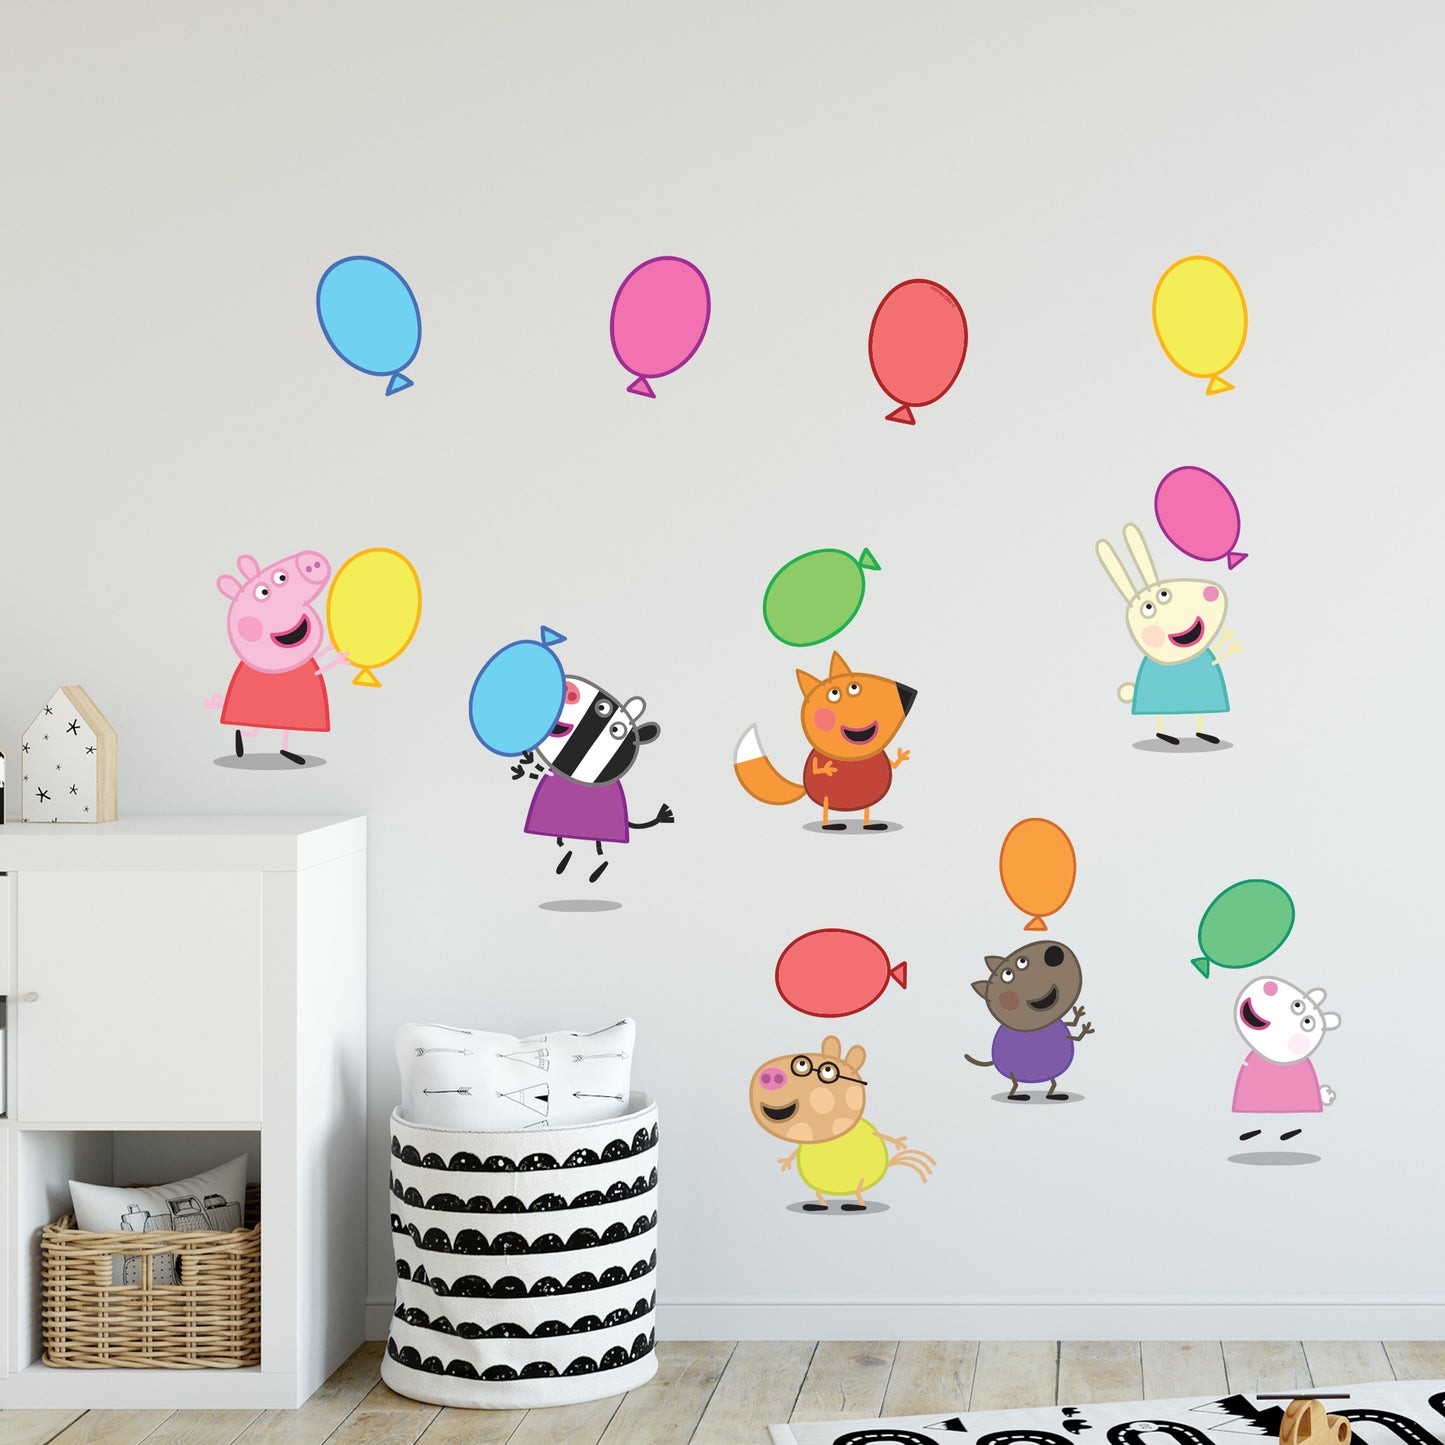 Peppa Pig Wall Sticker - Peppa Pig and Friends Playing With Balloons Set Wall Decal Kids Art